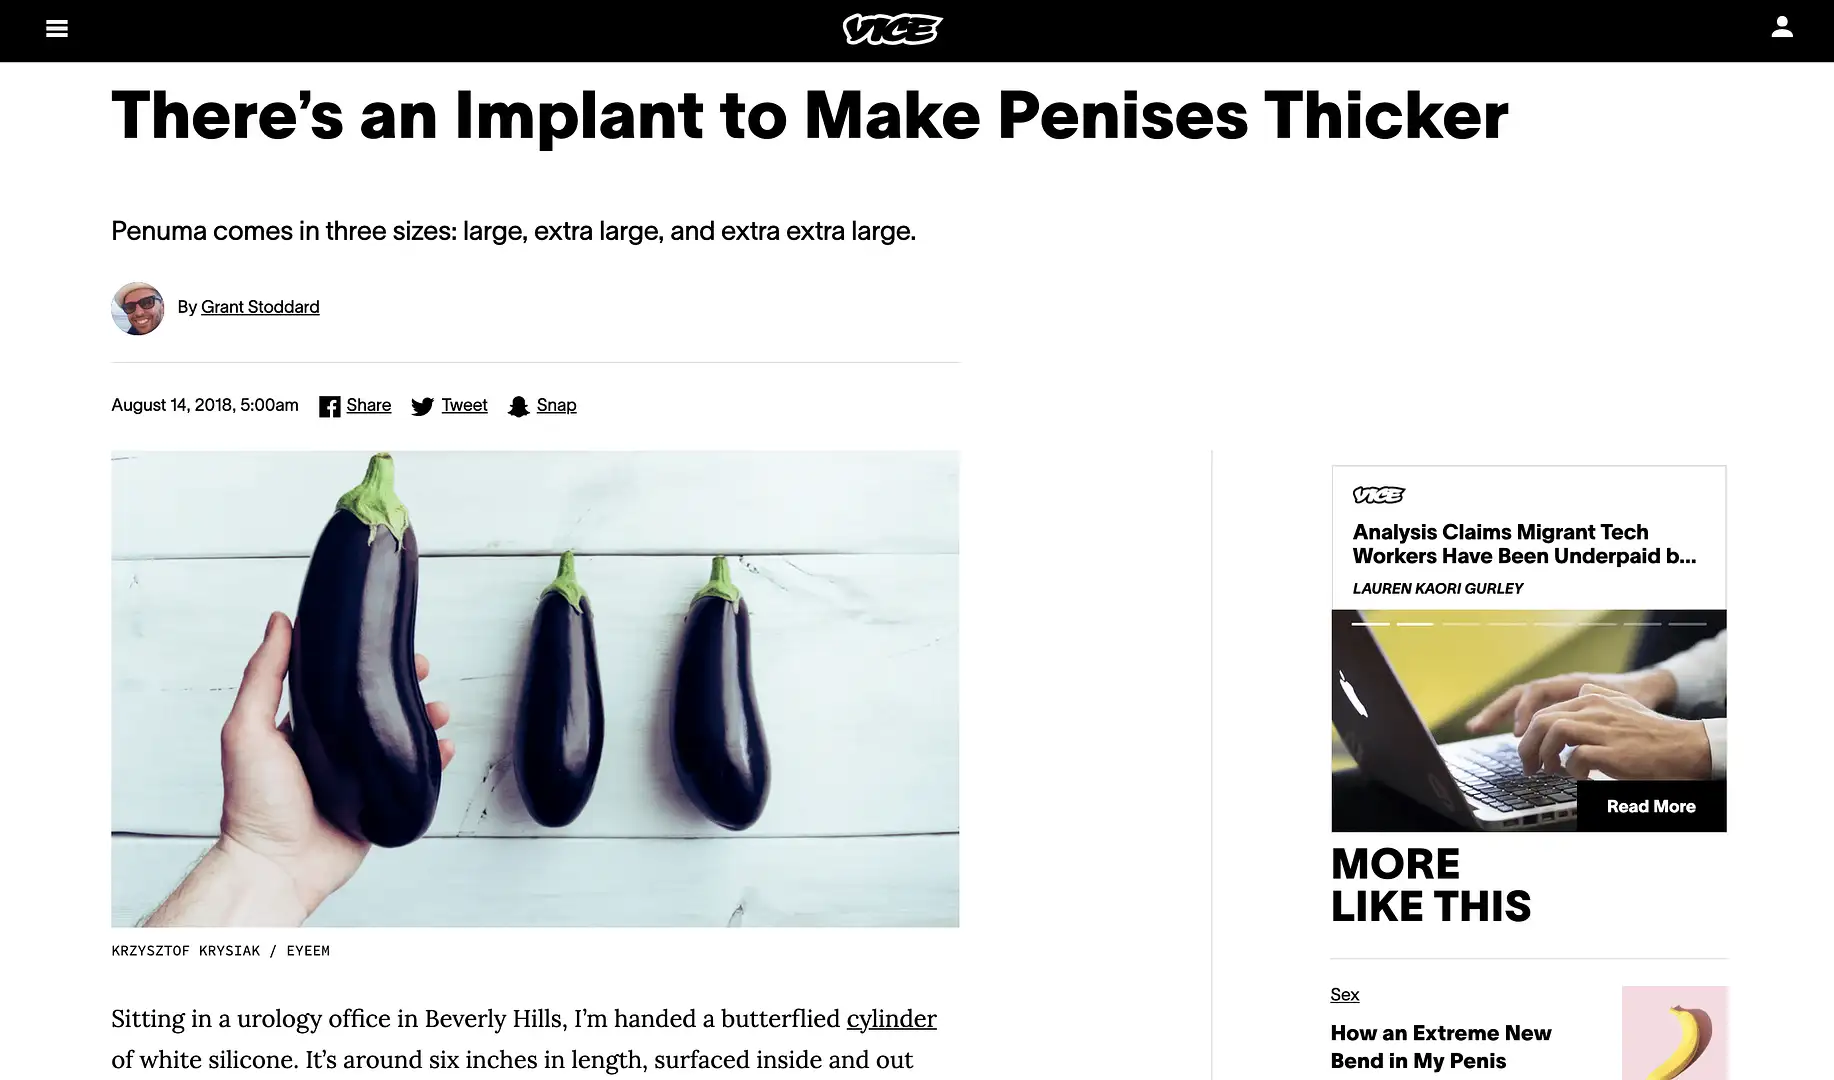 THERE’S AN IMPLANT TO MAKE PENISES THICKER